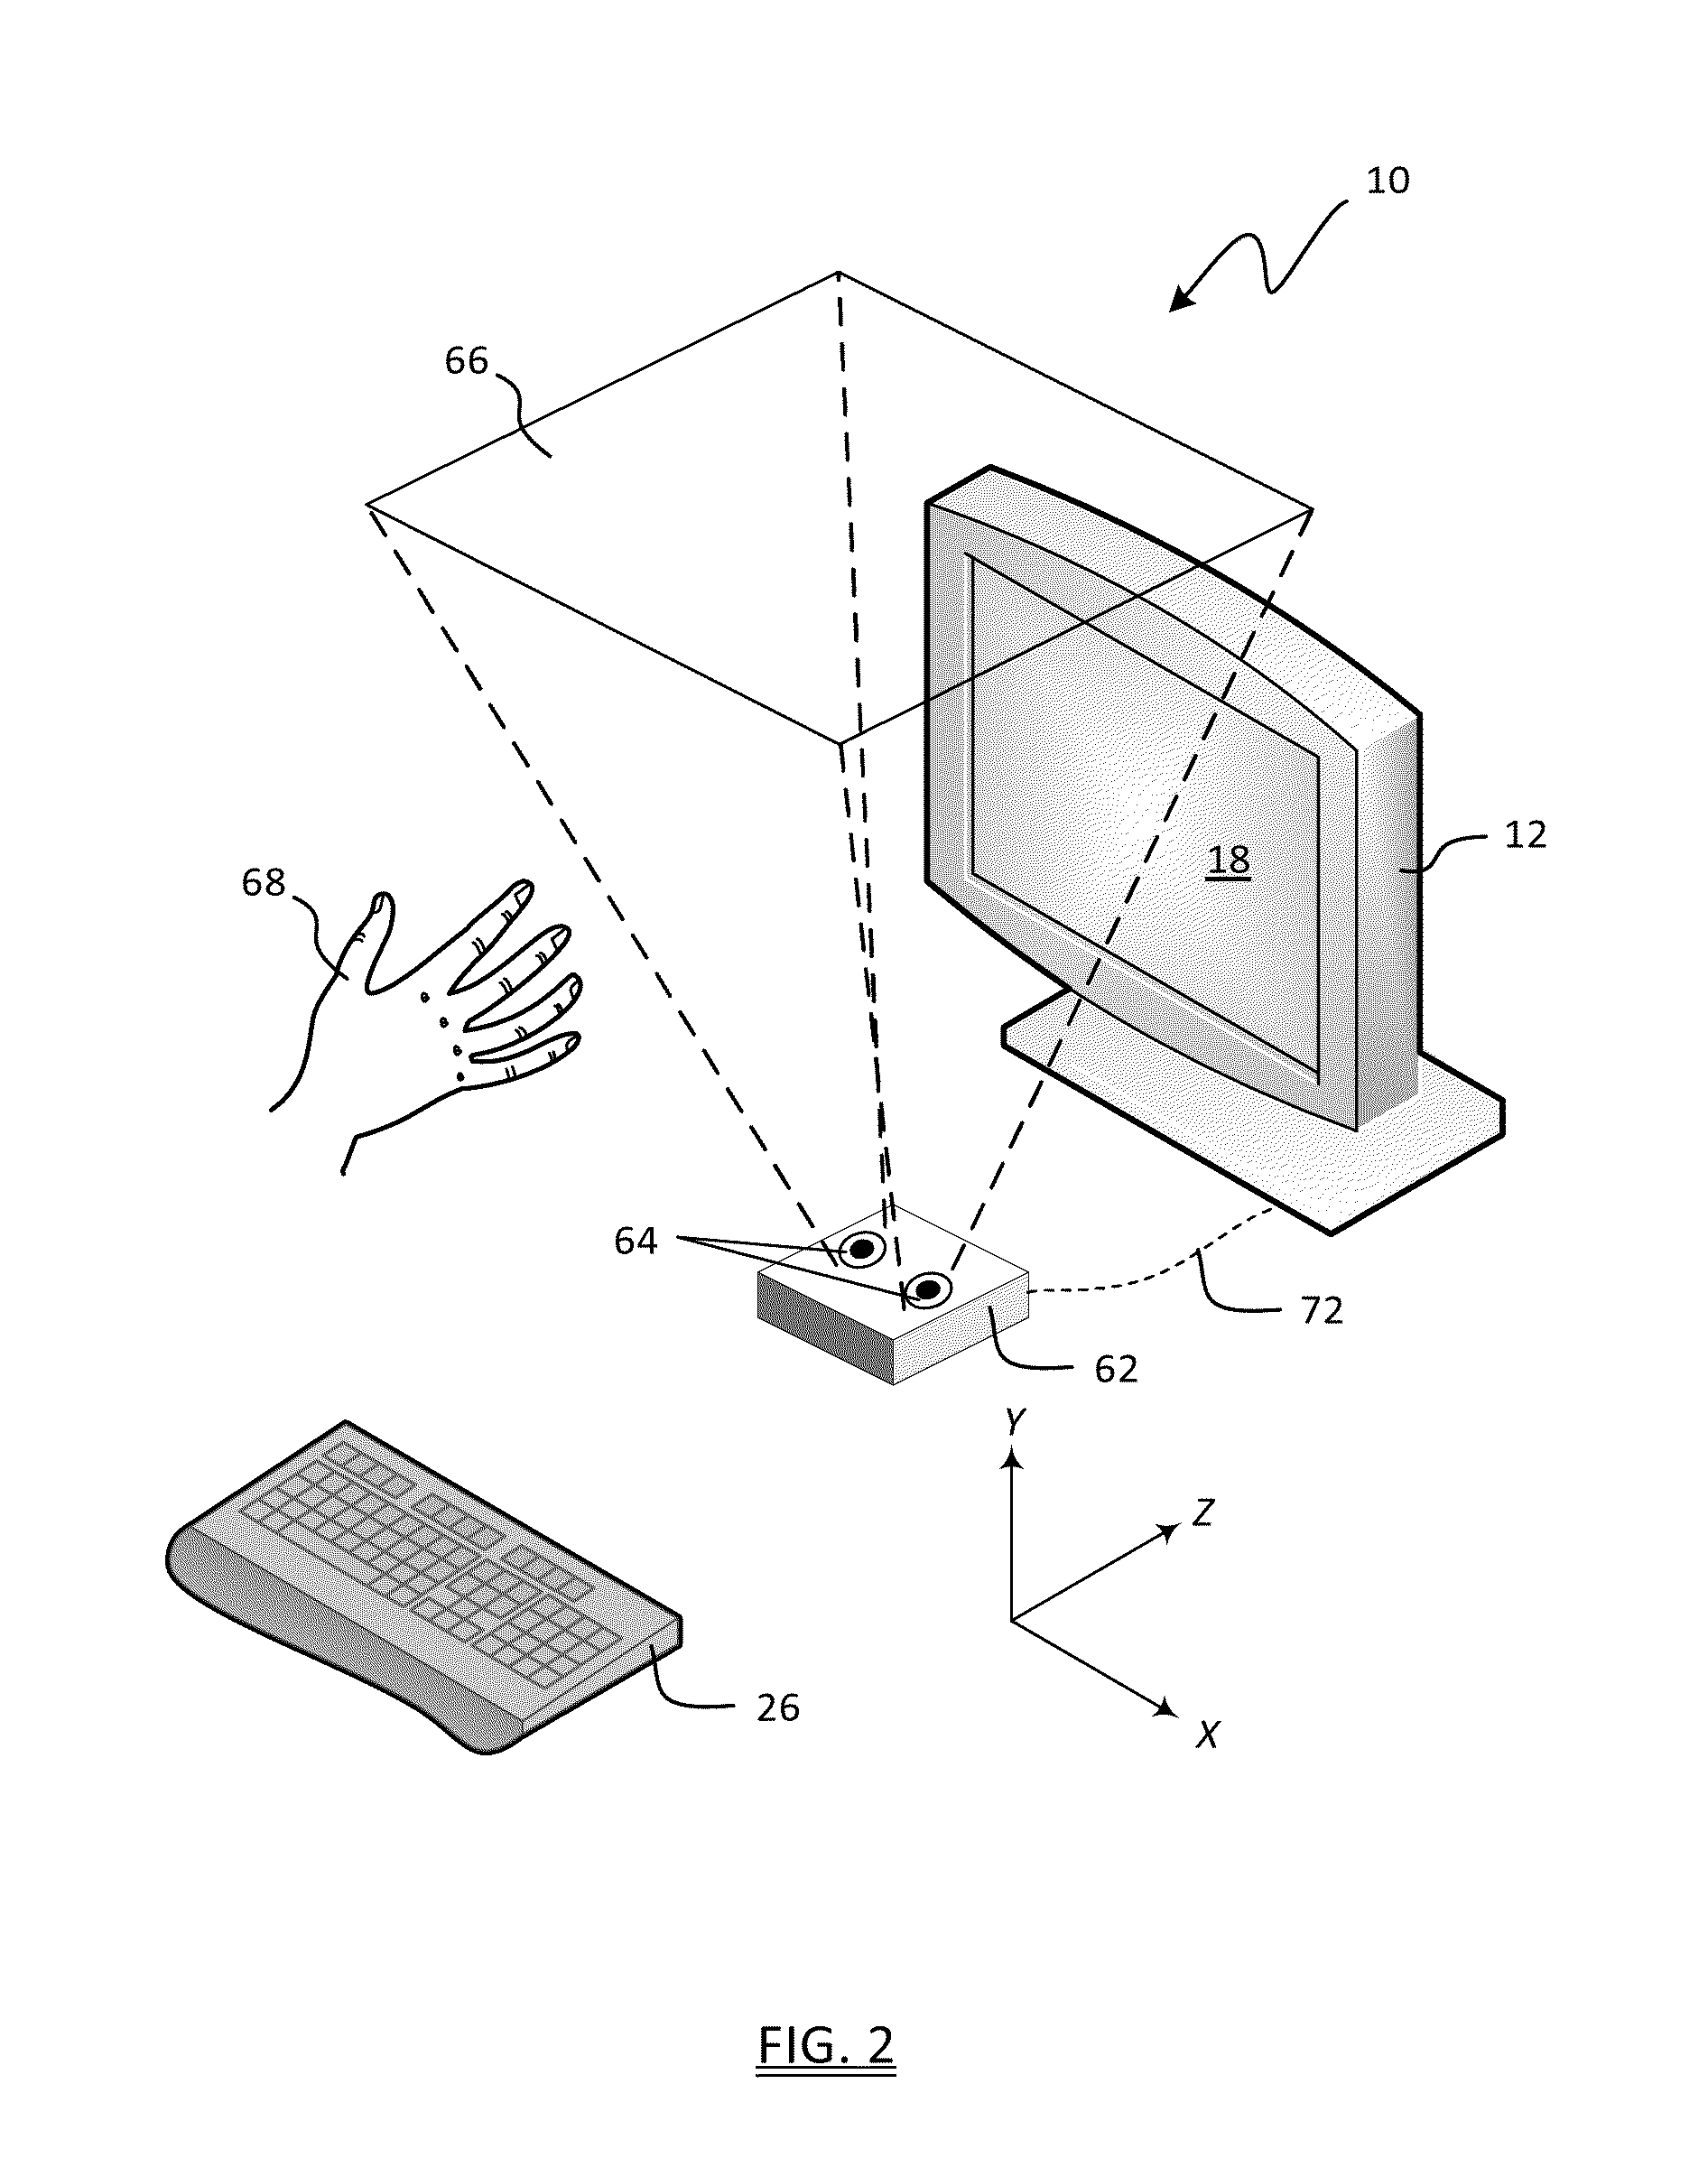 Dynamic tool control in a digital graphics system using a vision system